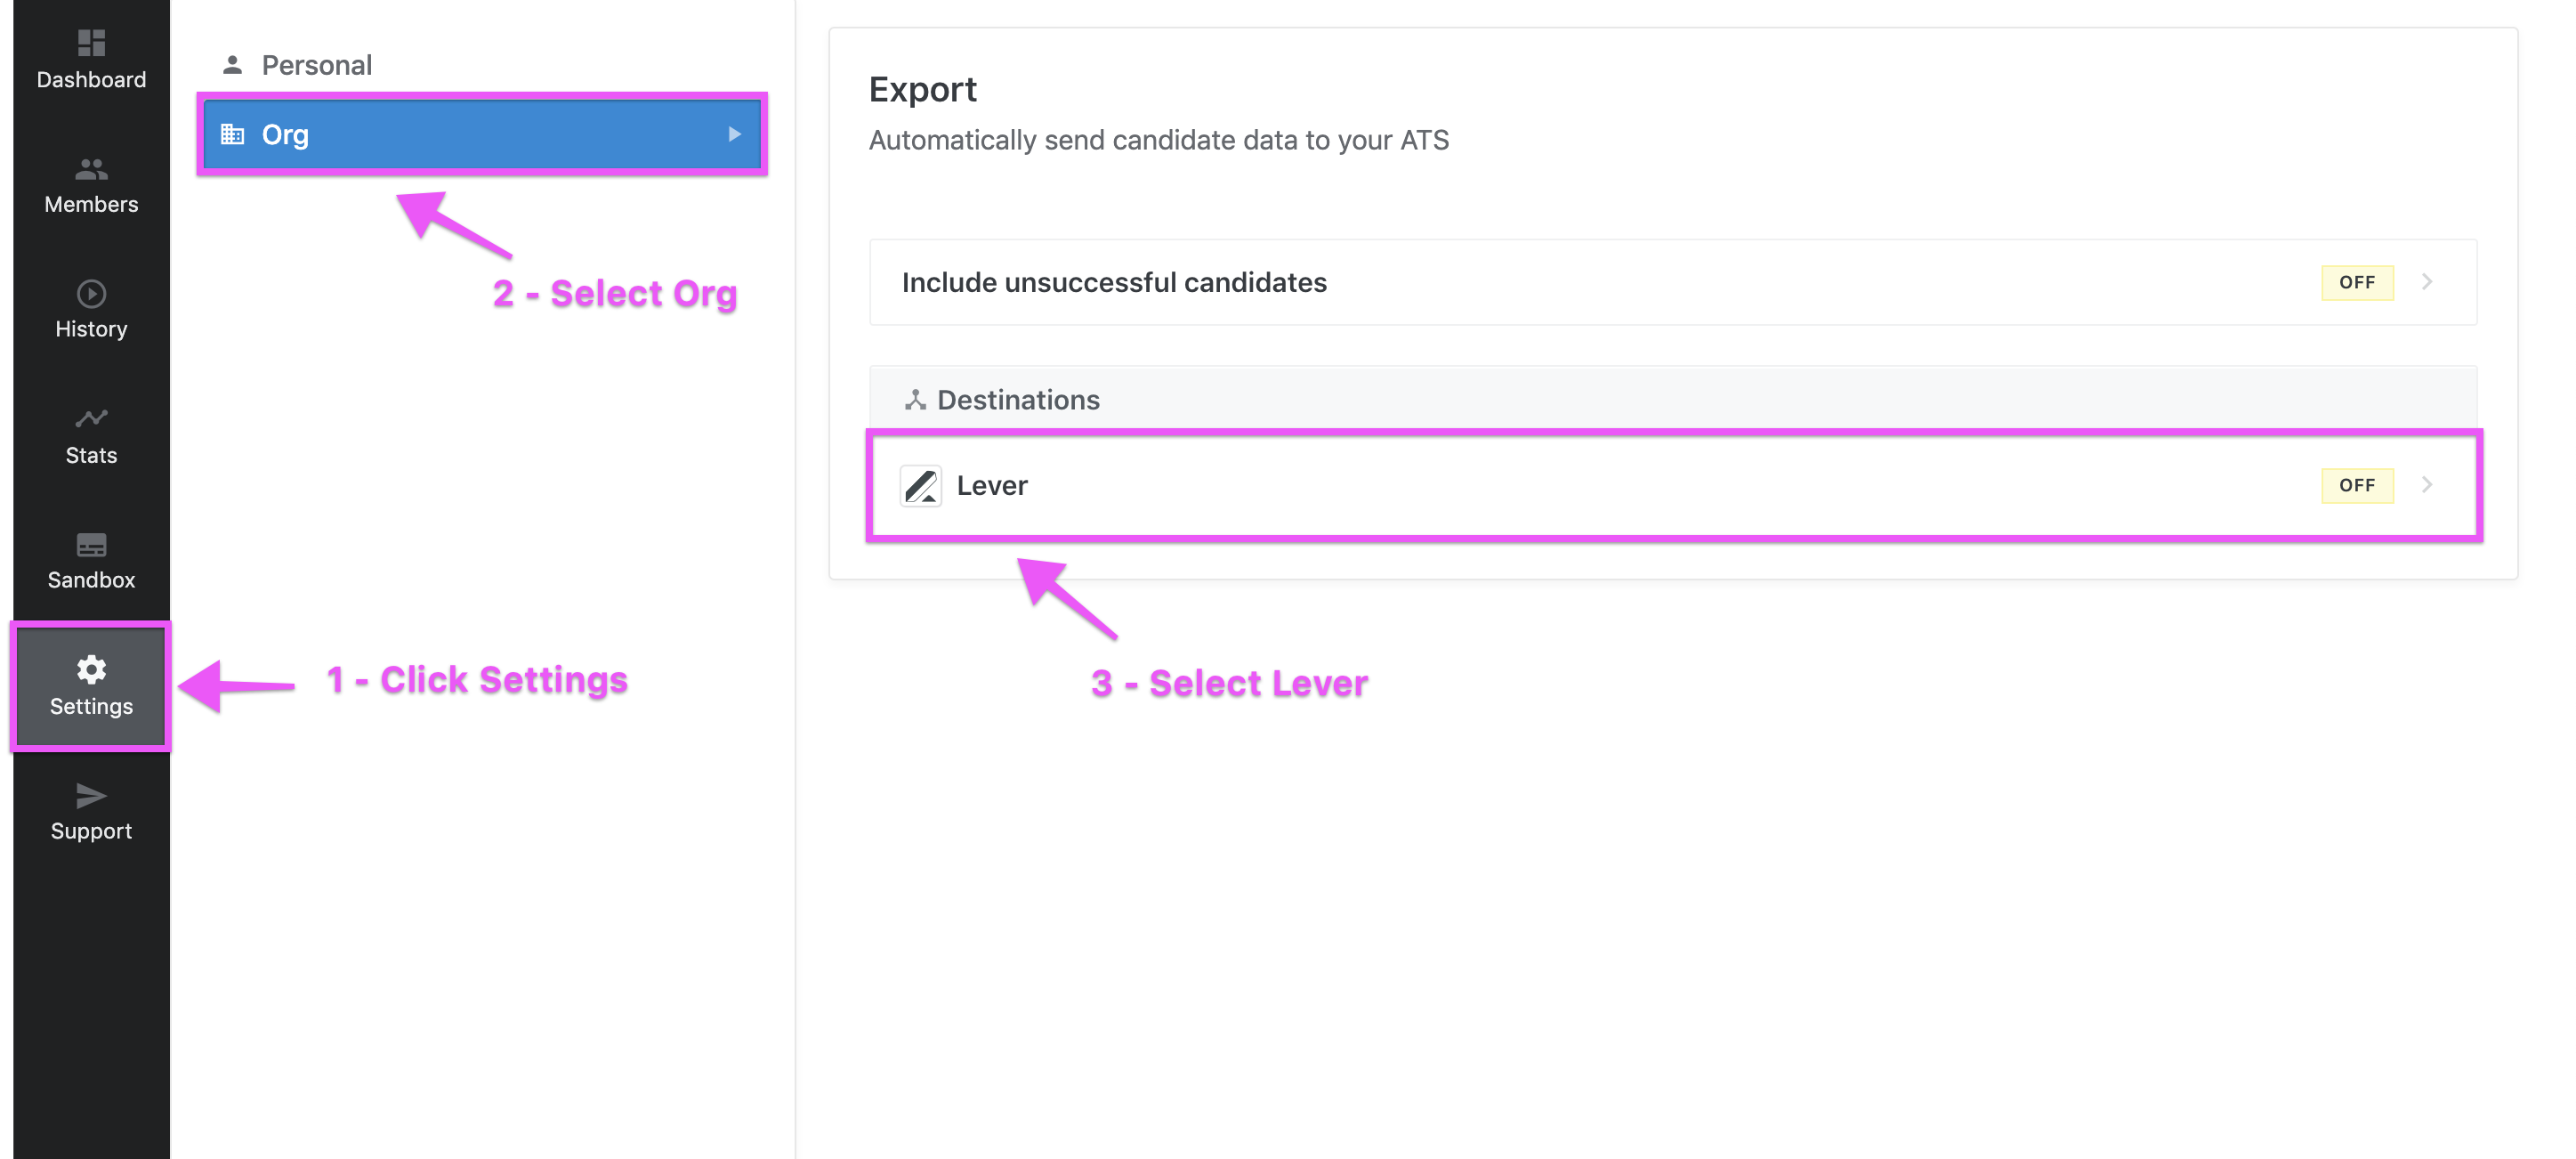 Settings page in interviewing.io with arrows pointing to Settings button and Lever export option.